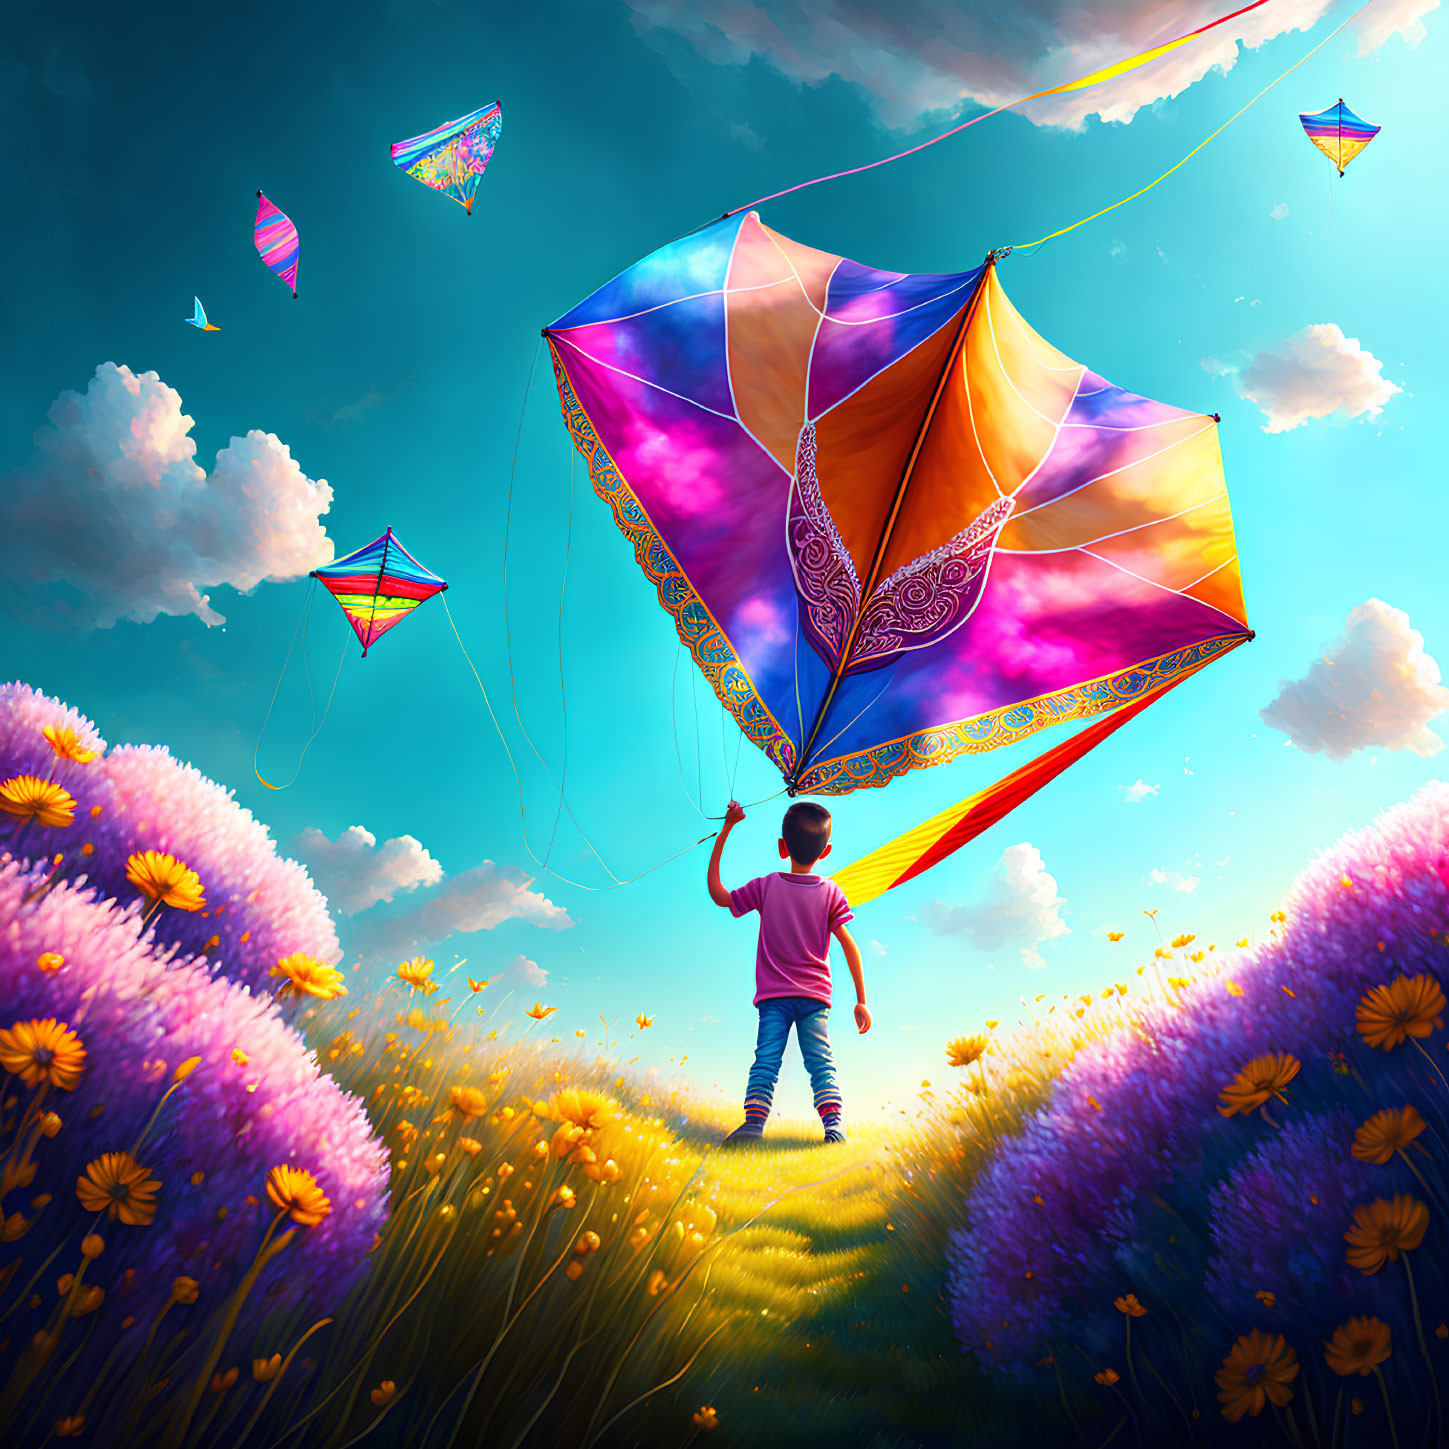 Child flying colorful kite in vibrant field on sunny day